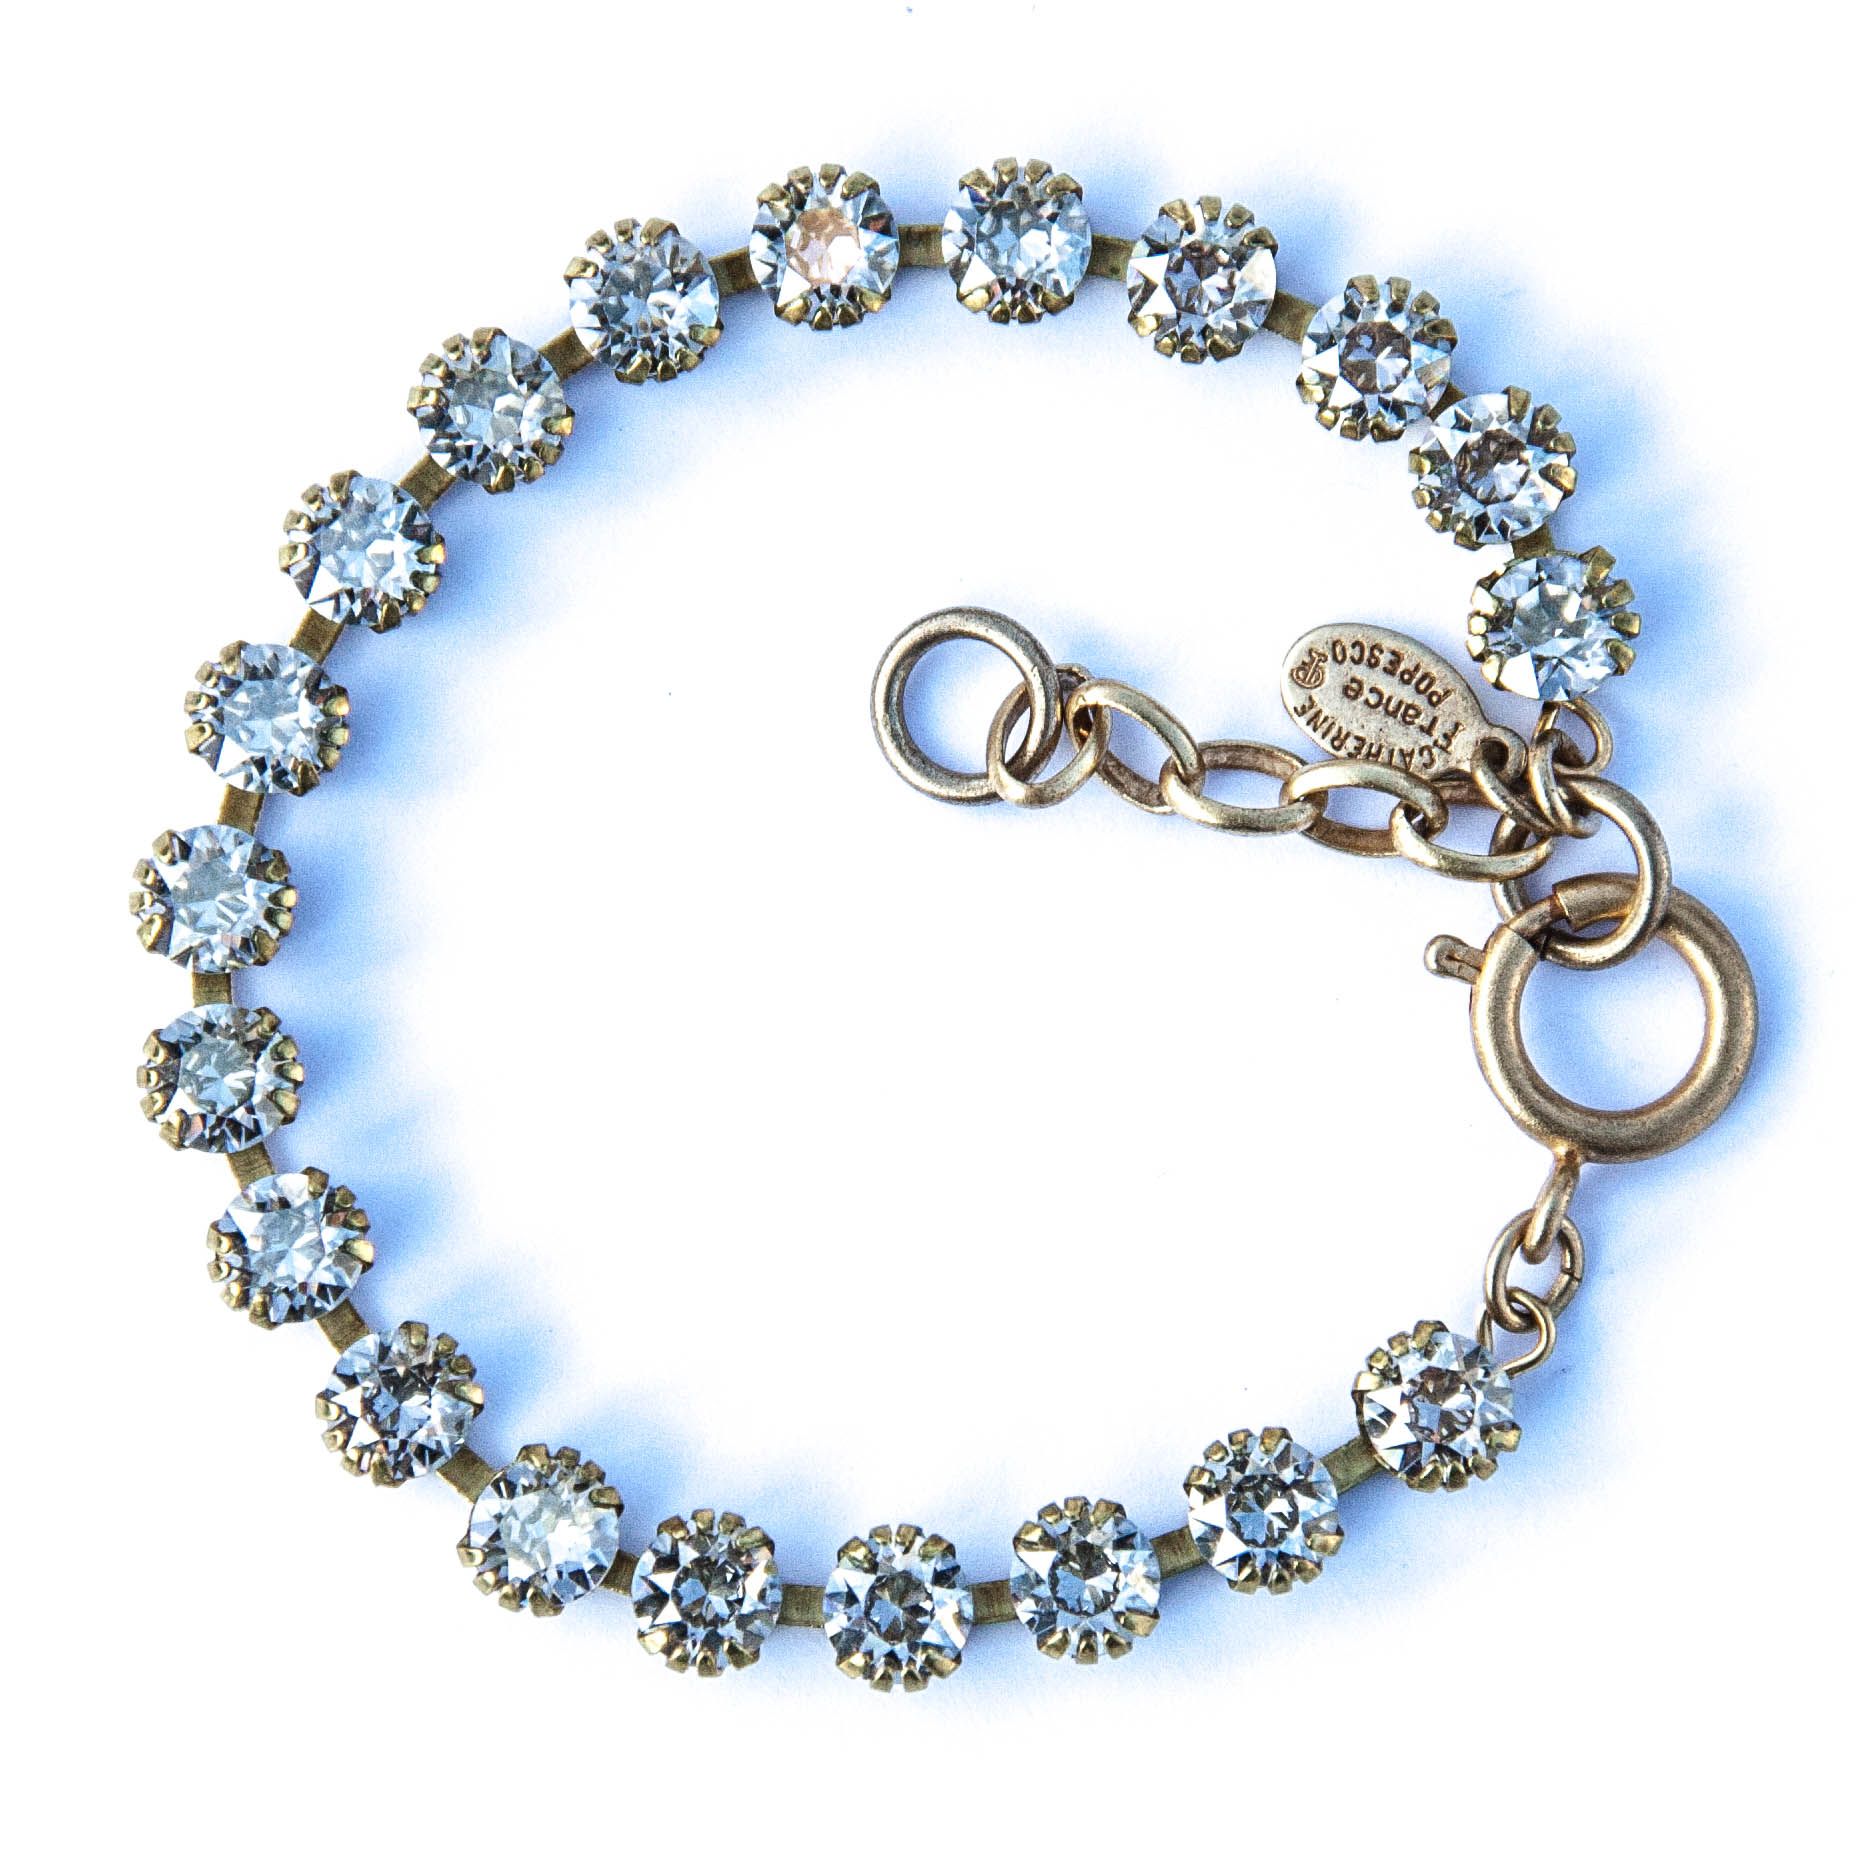 Catherine Popesco Small Stone Crystal Bracelet - Shade and Silver